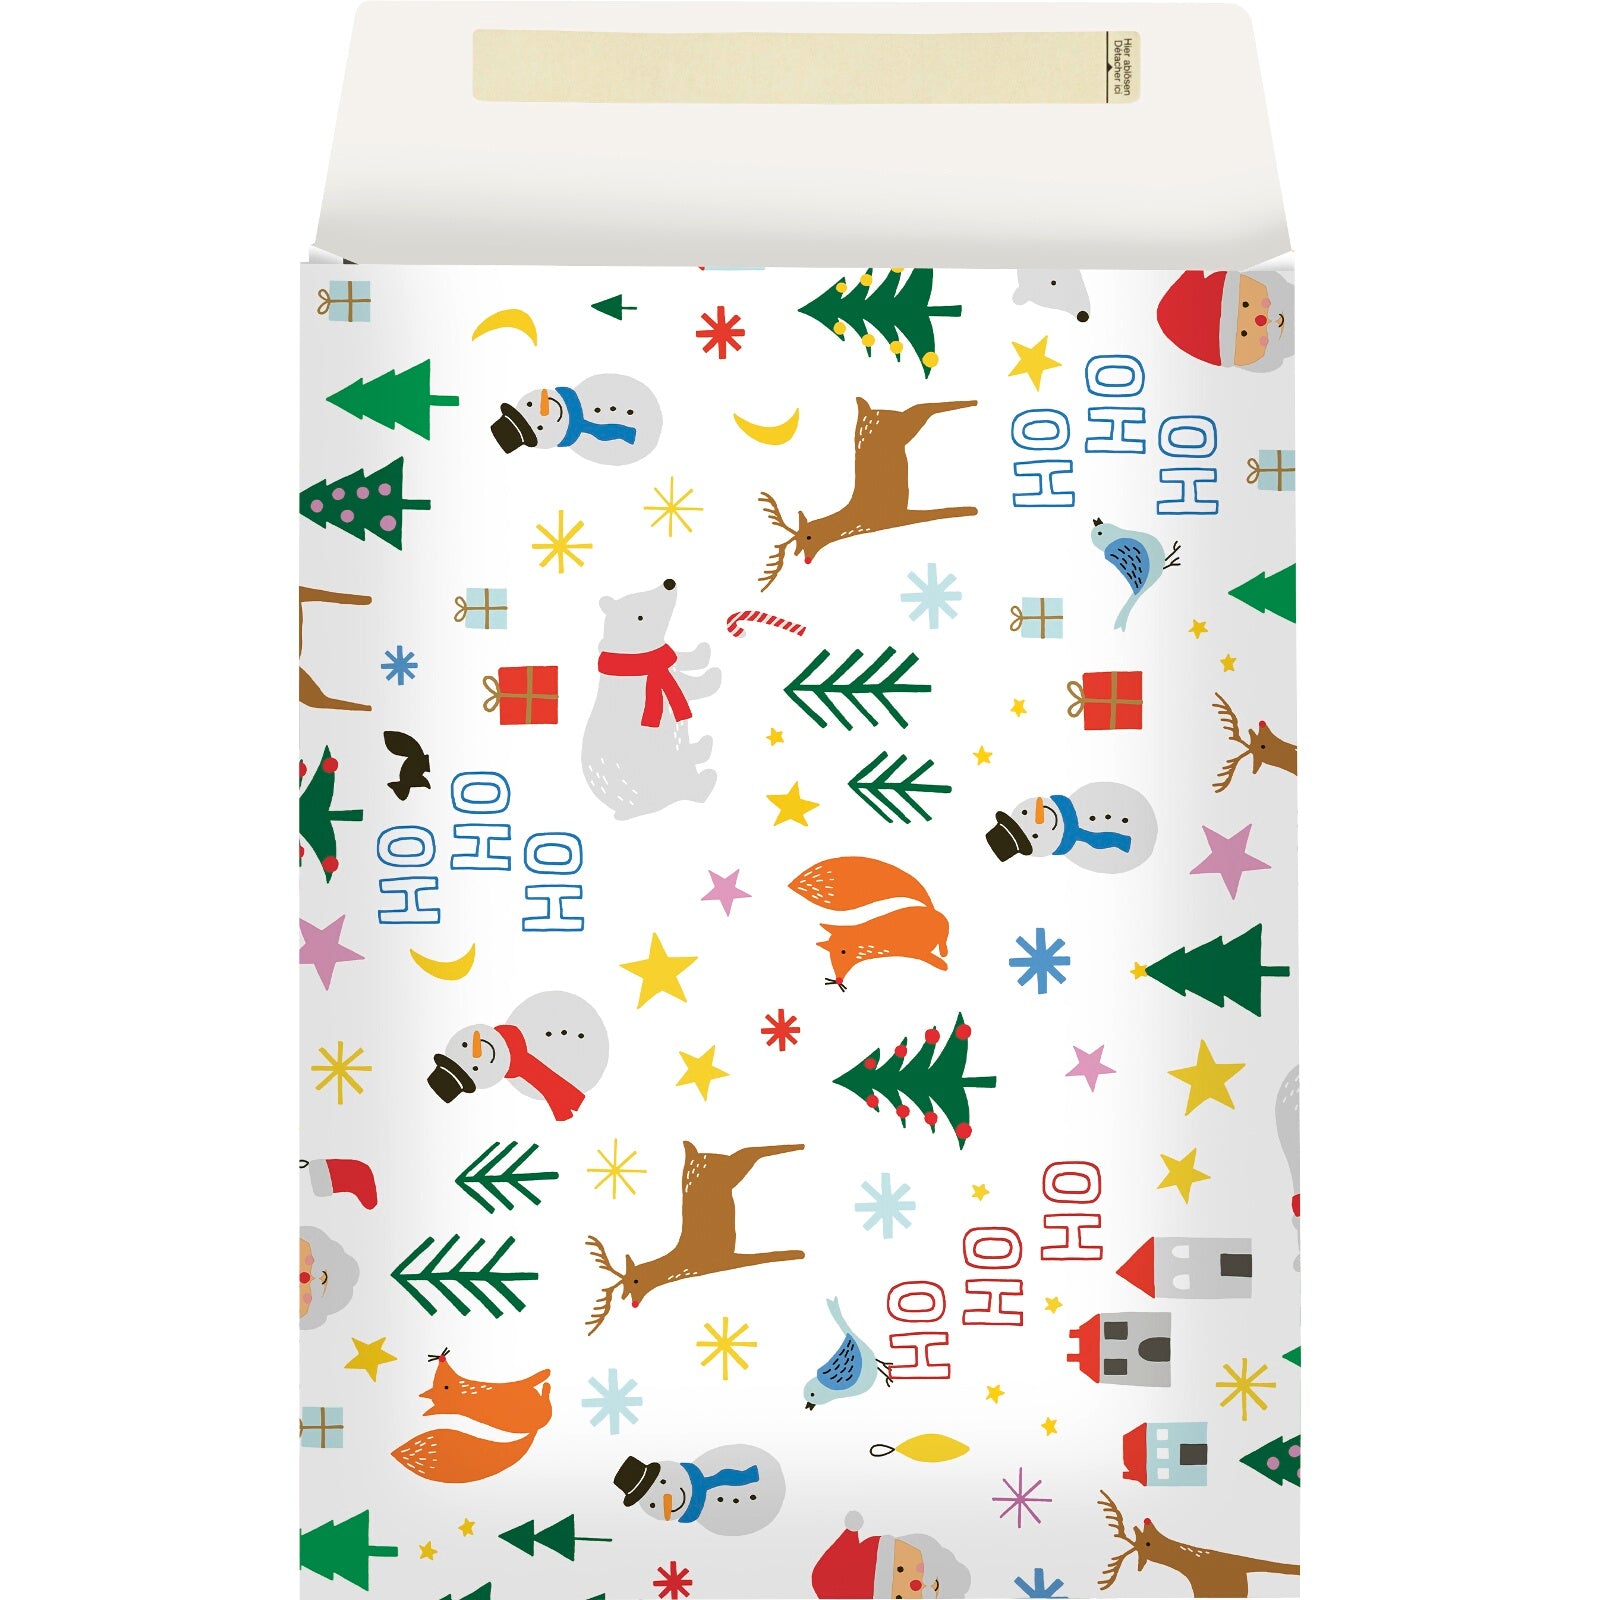 A Christmas envelope gift bag featuring a childlike pattern of festive icons e.g. snowmen, trees and presents on a white background.